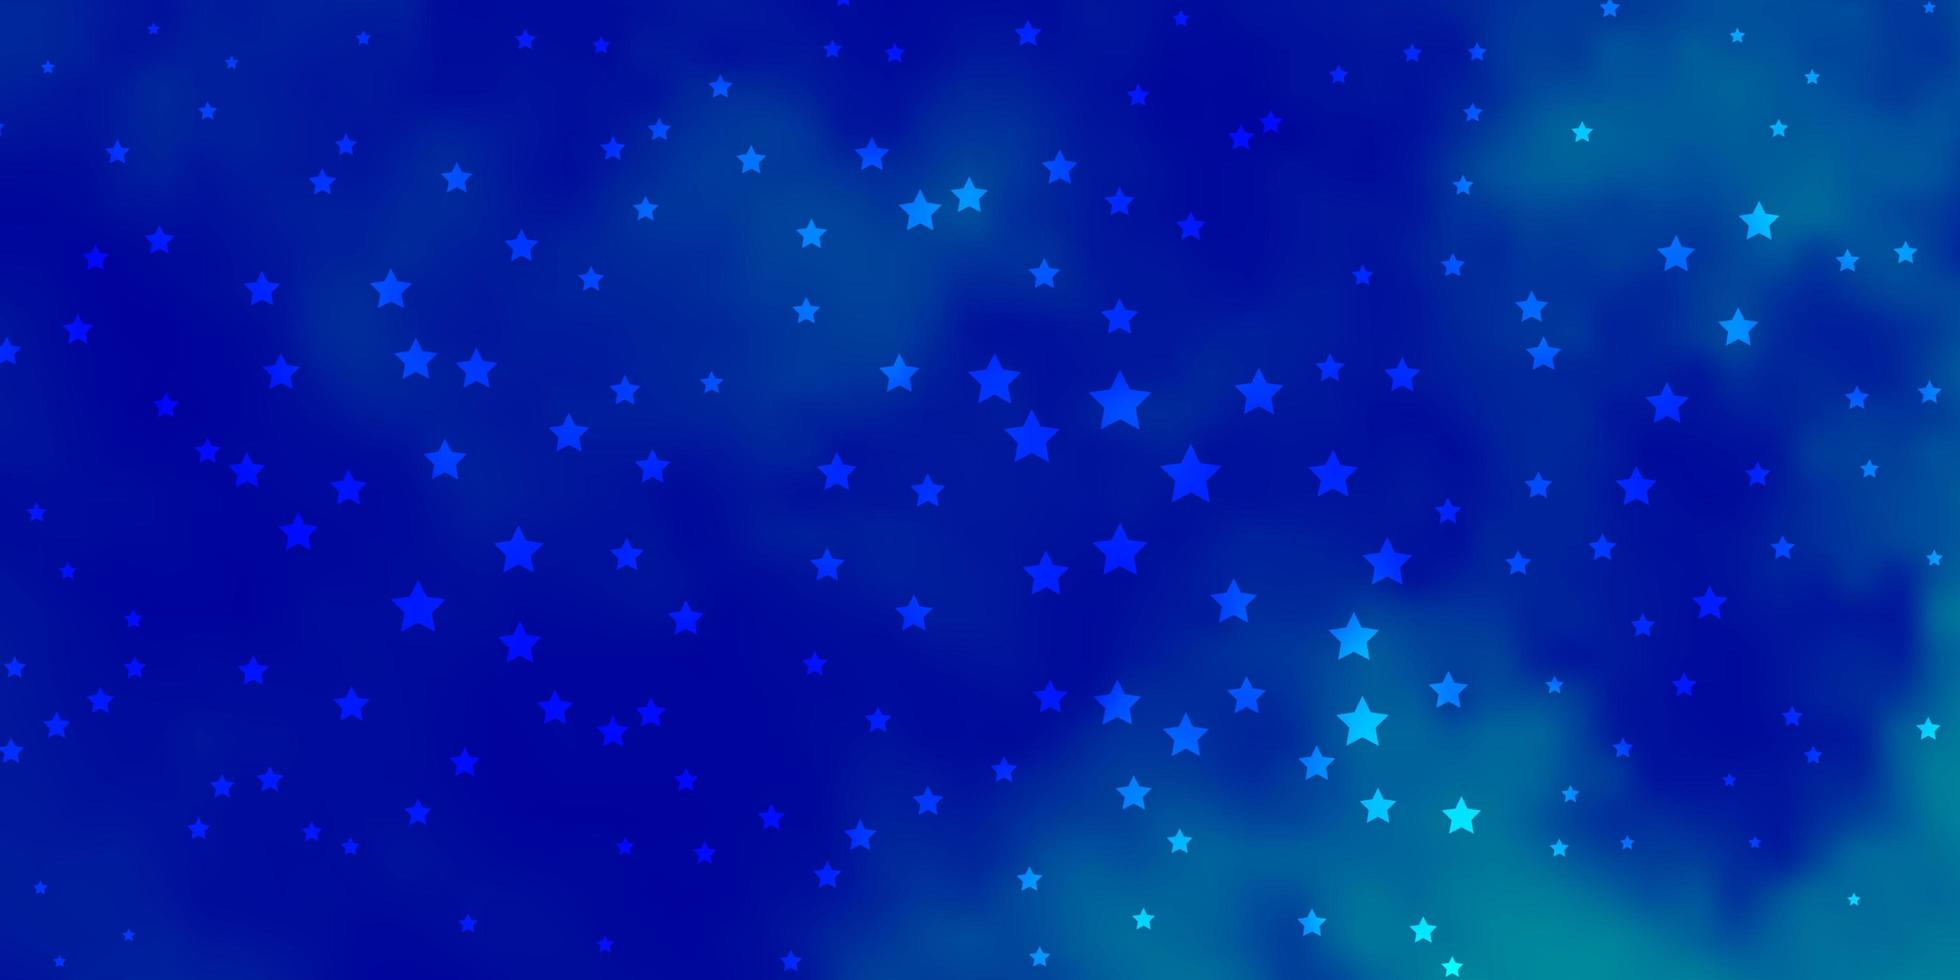 Dark BLUE vector template with neon stars. Colorful illustration with abstract gradient stars. Pattern for wrapping gifts.